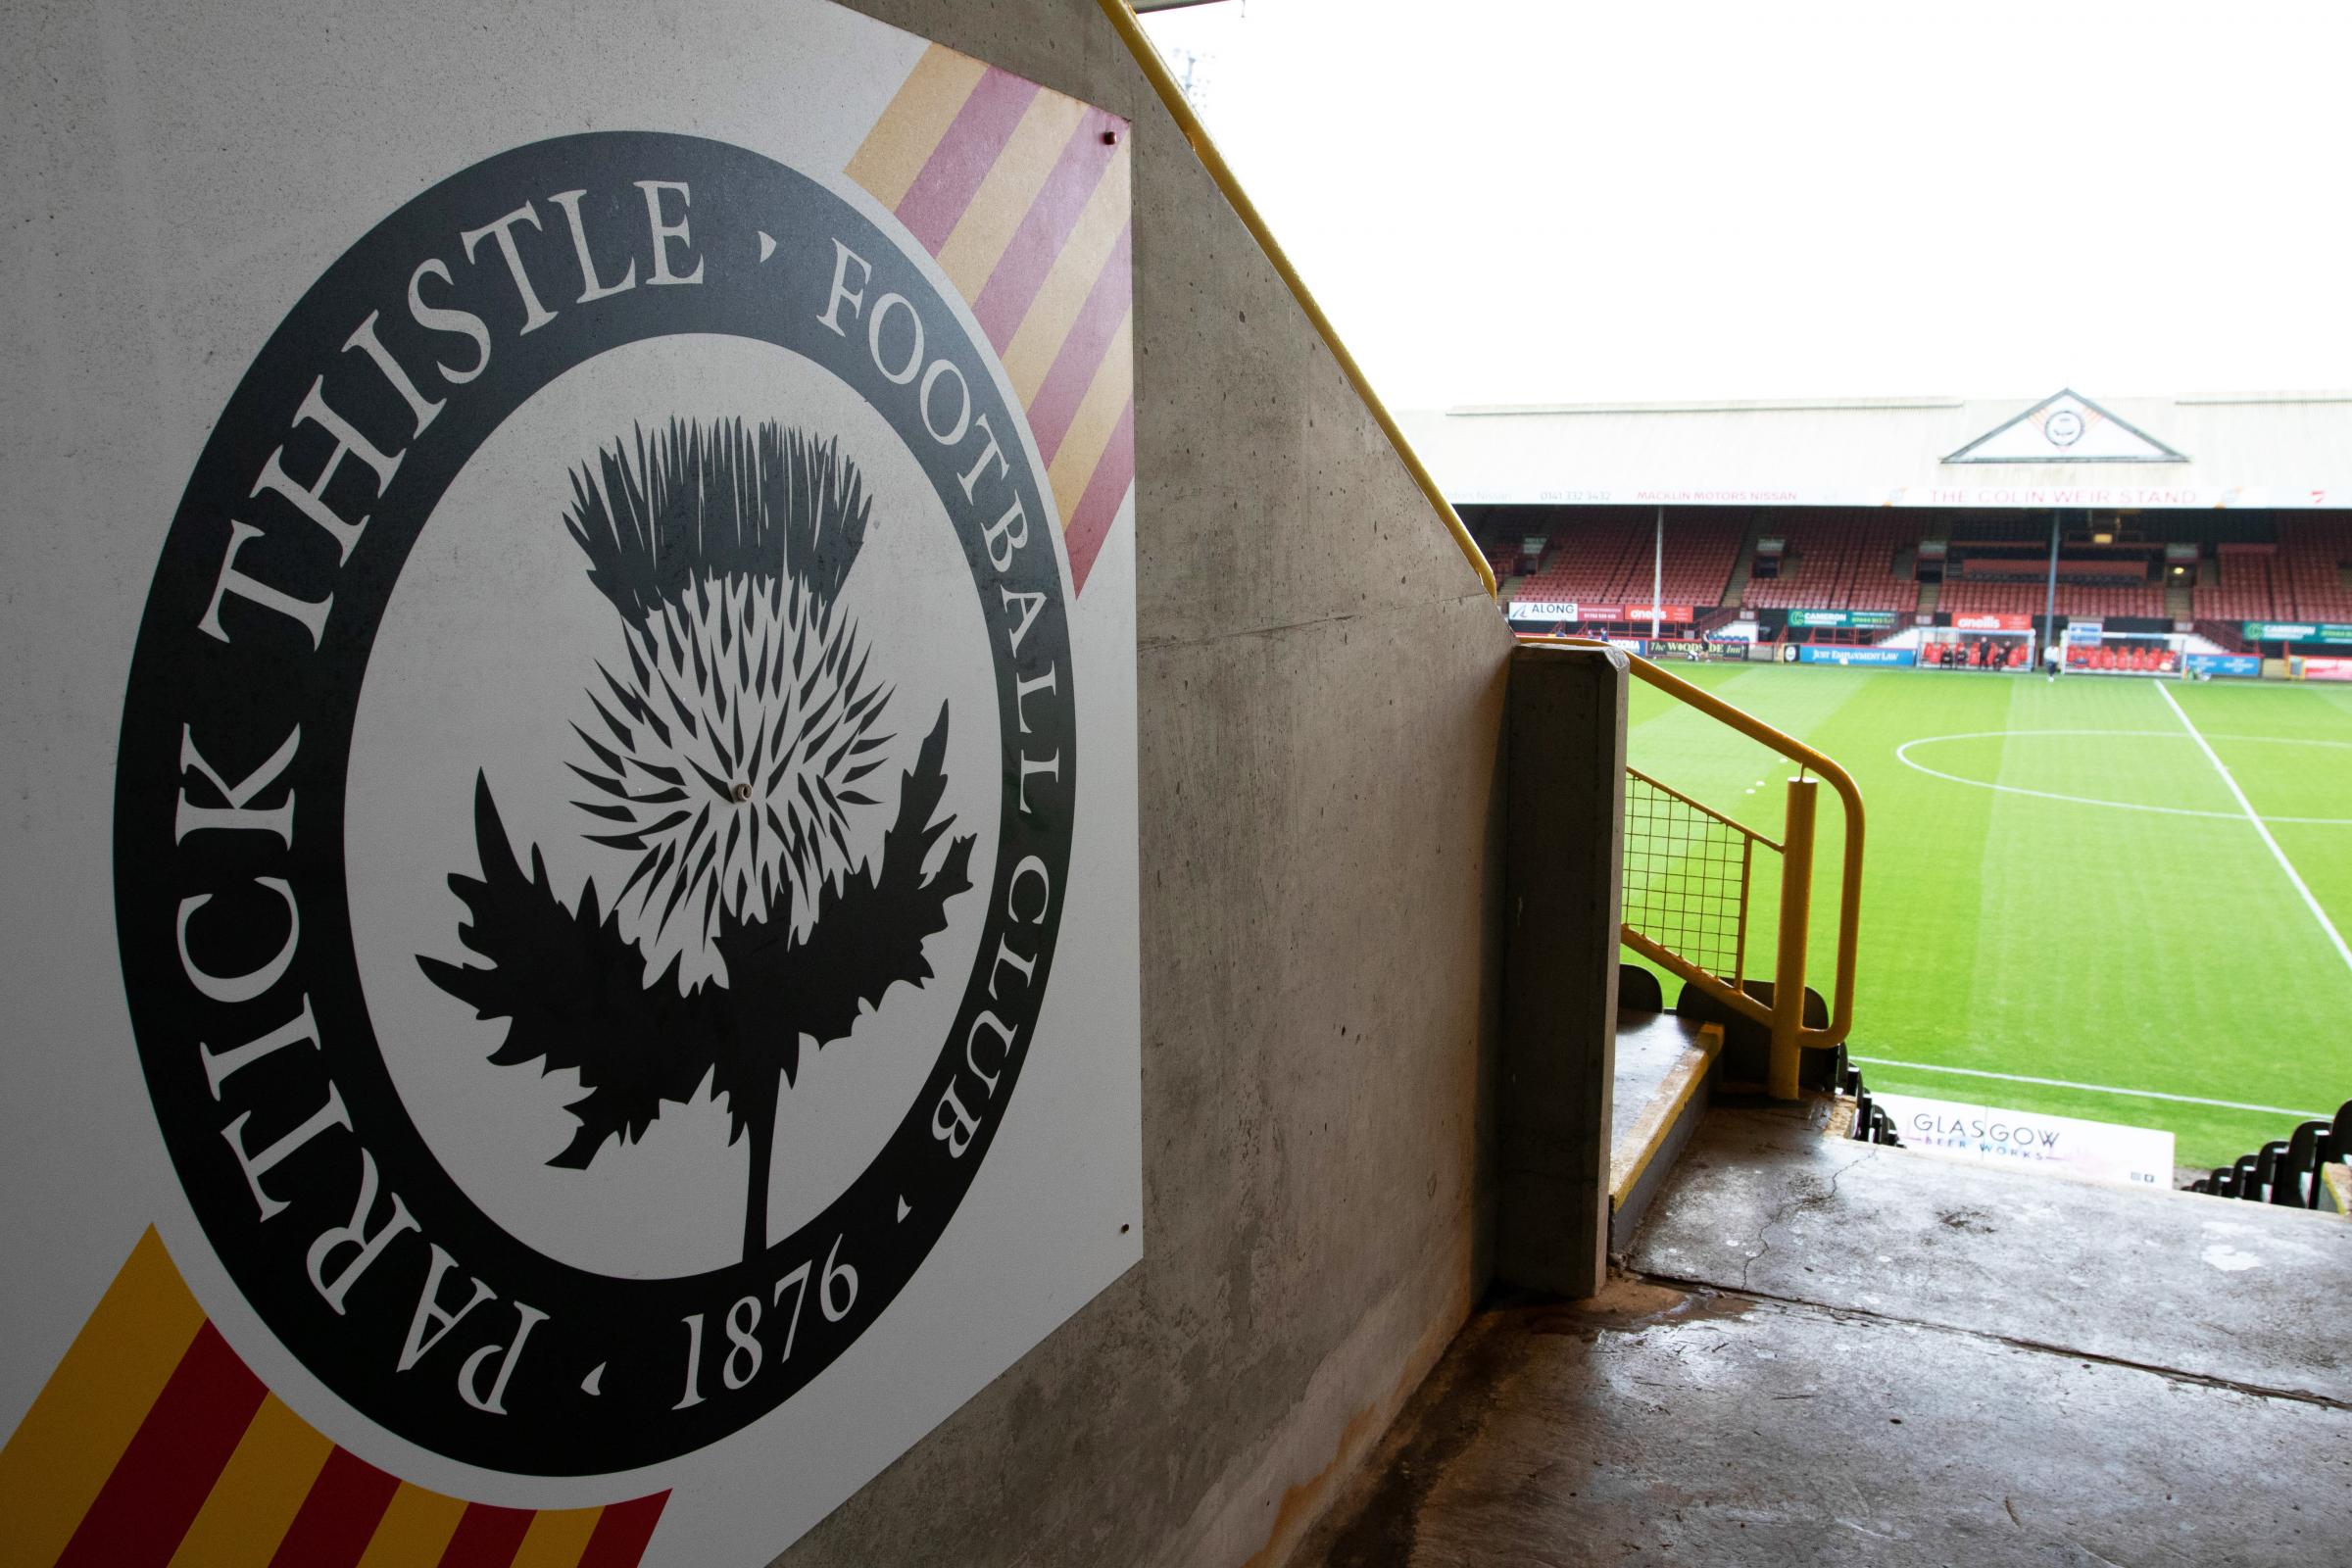 Timeline put in place for Partick Thistle's move to fan ownership